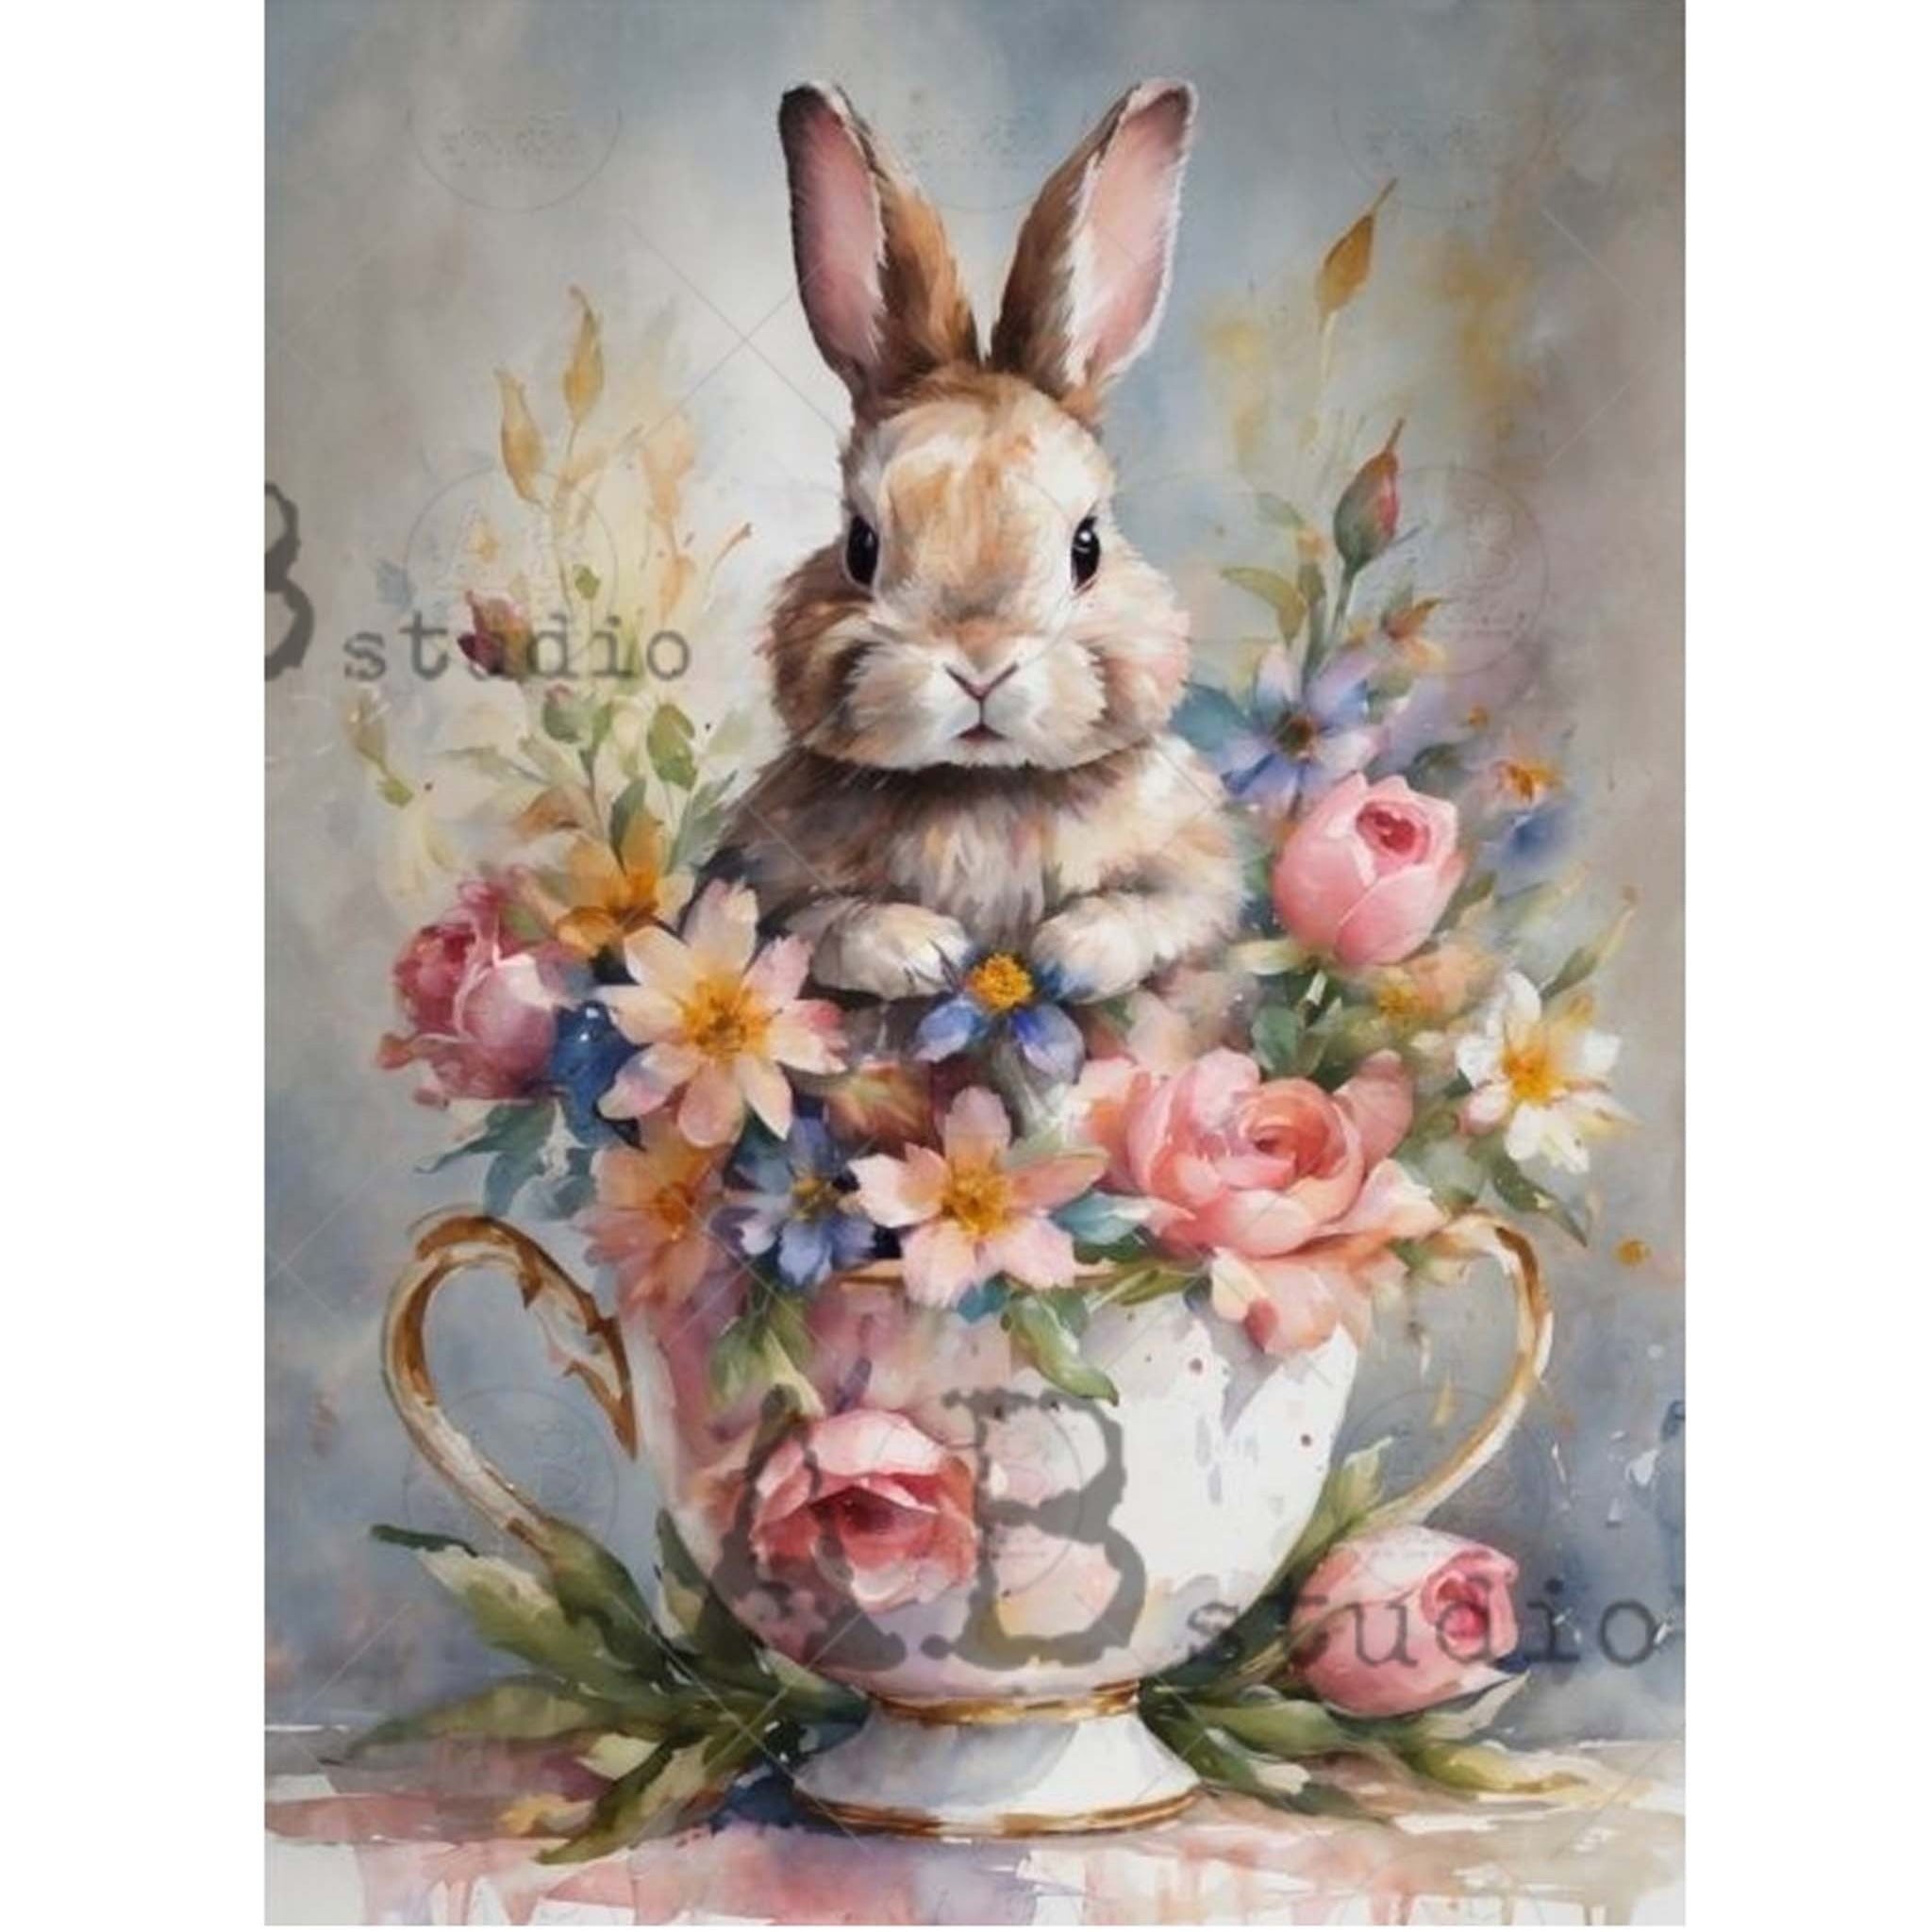 A4 rice paper design featuring a sweet bunny in a teacup surrounded by a bouquet of flowers. White borders on the sides.